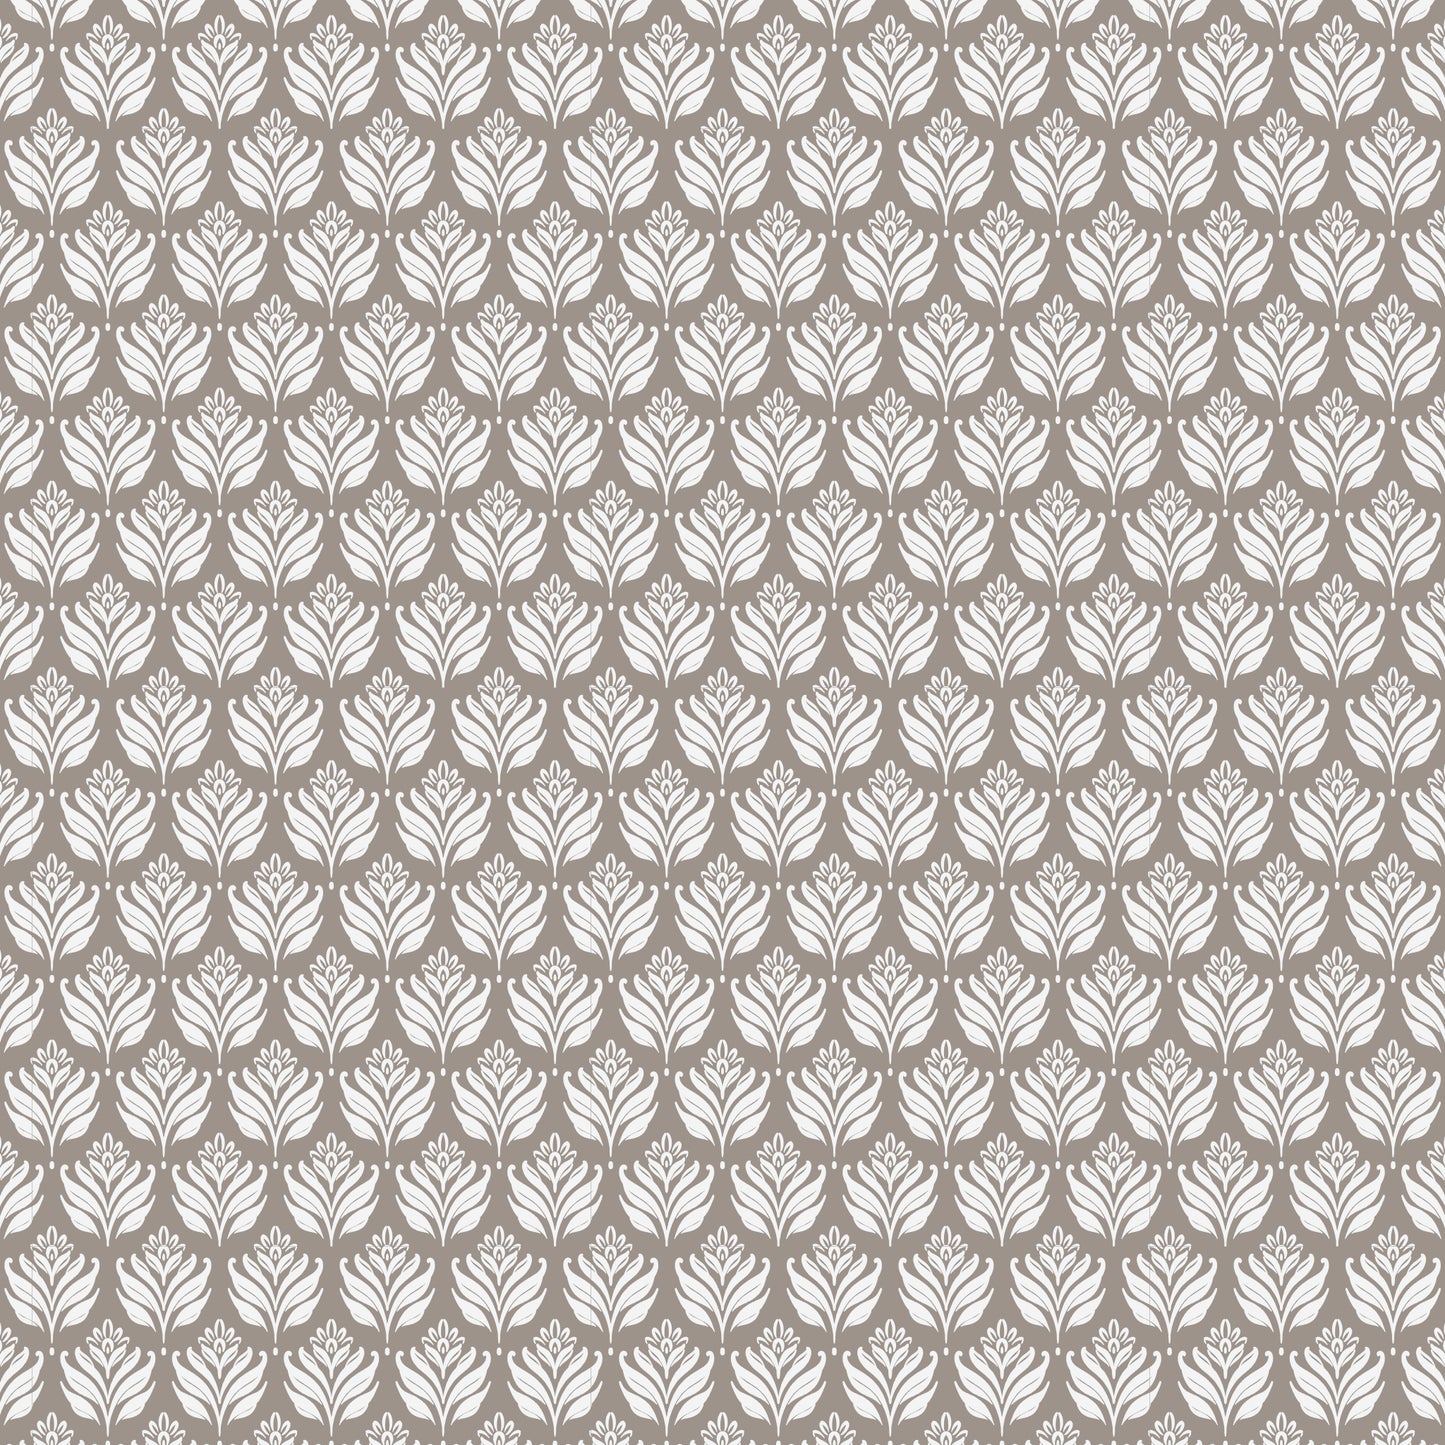 Introducing our Elegant Leaves Wallpaper in Oatmeal. These subtle leaves add a touch of sophistication to any space. Elevate your room with our premium wallpaper, designed for those with refined taste.